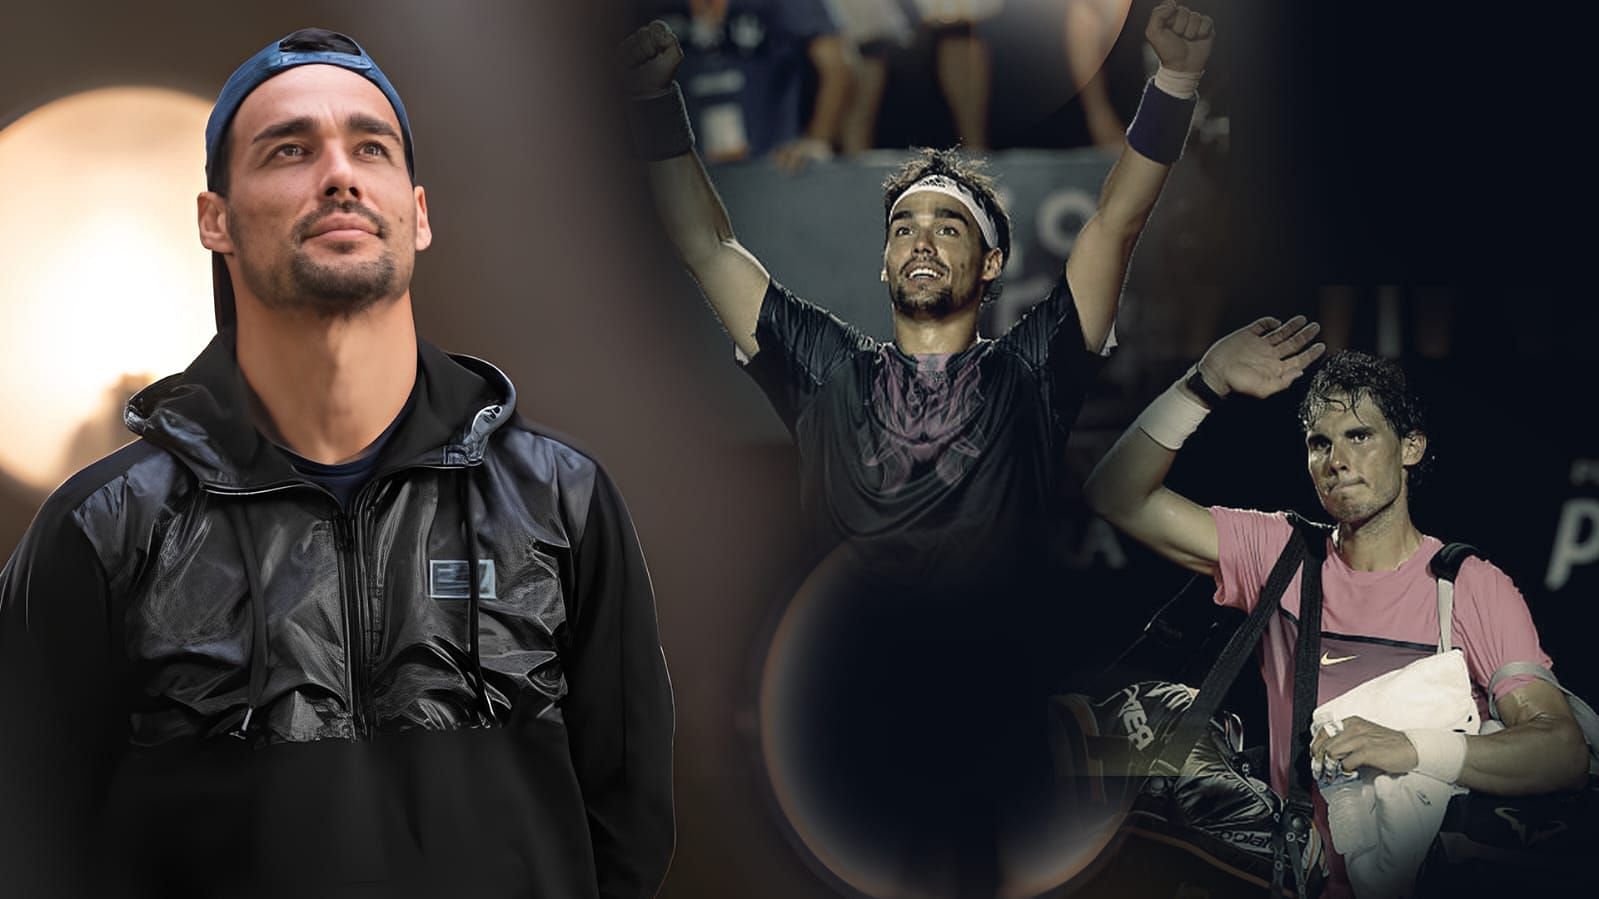 Fognini relives the good times